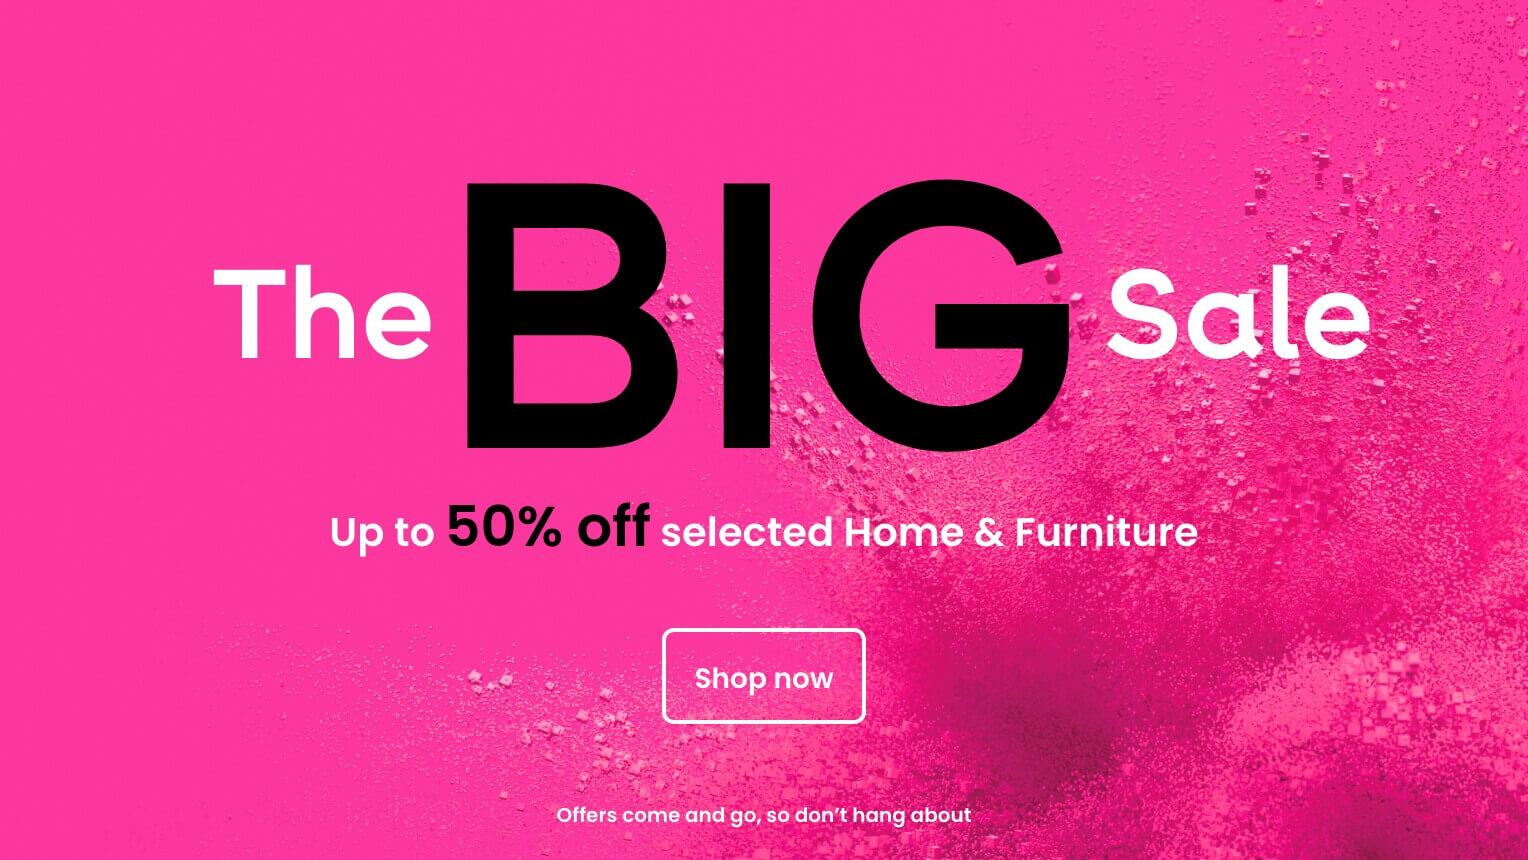 Save up to 50% on selected Home & Furniture